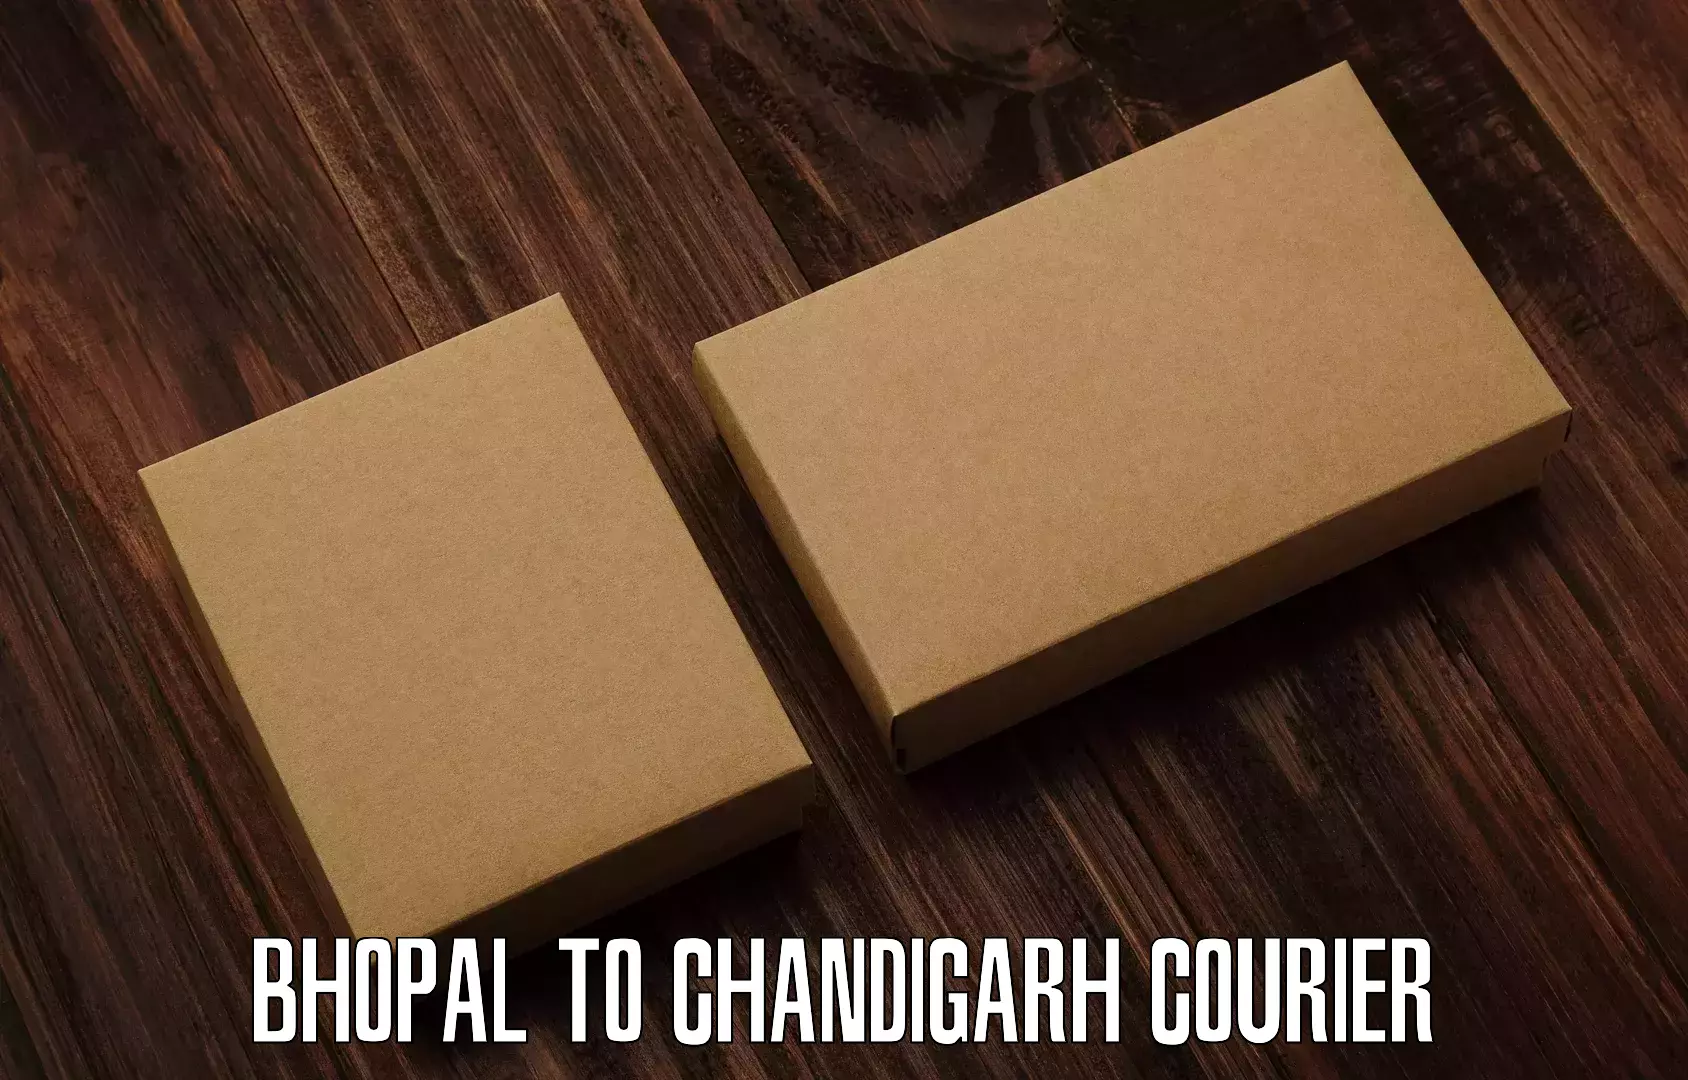 International courier networks Bhopal to Chandigarh